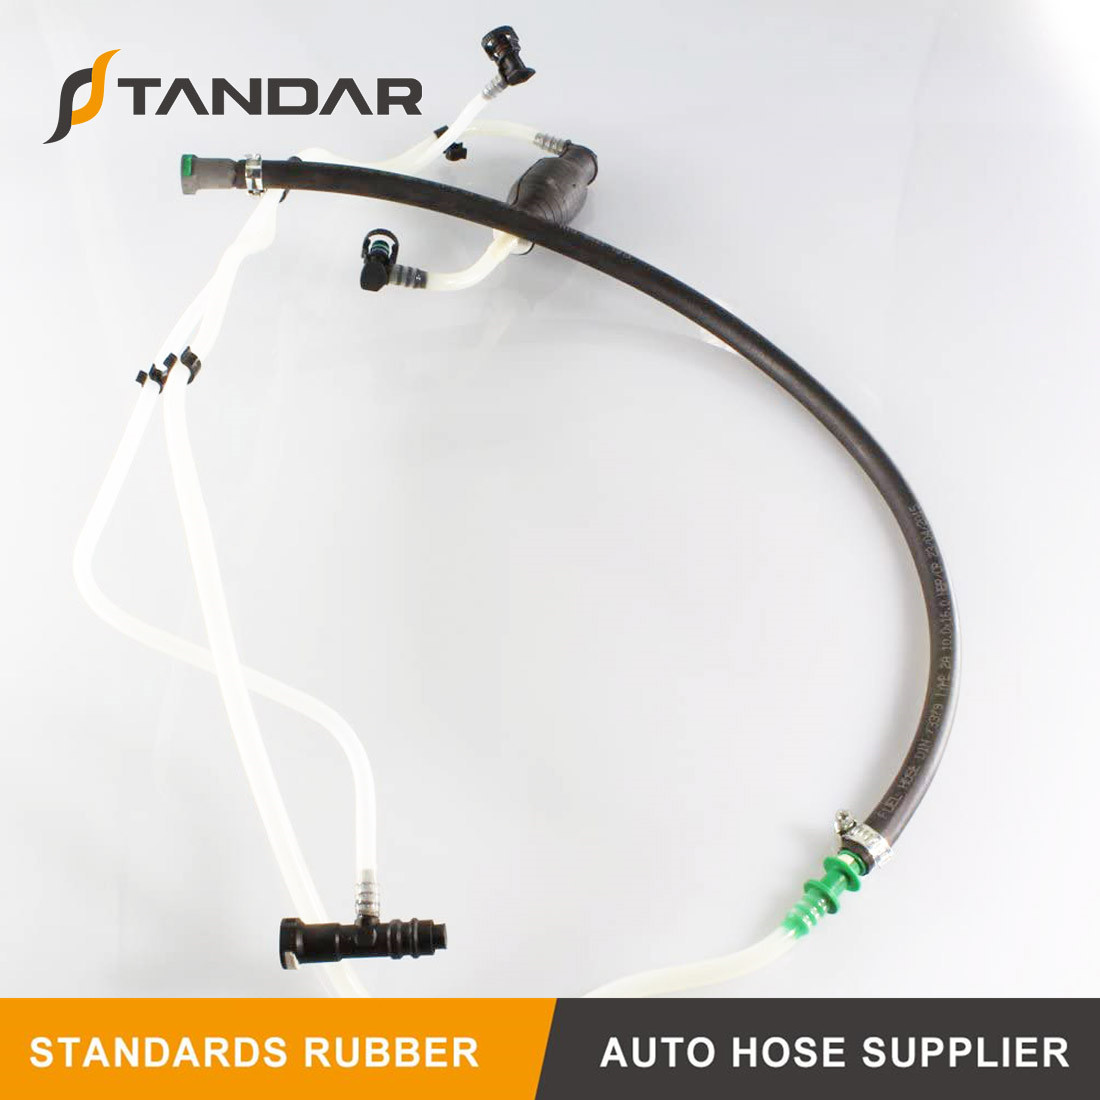 7700111932 8200050395 8200360597 rubber braided submersible outboard flexible automative diesel Fuel Line With Hand Pump For Renault Kangoo